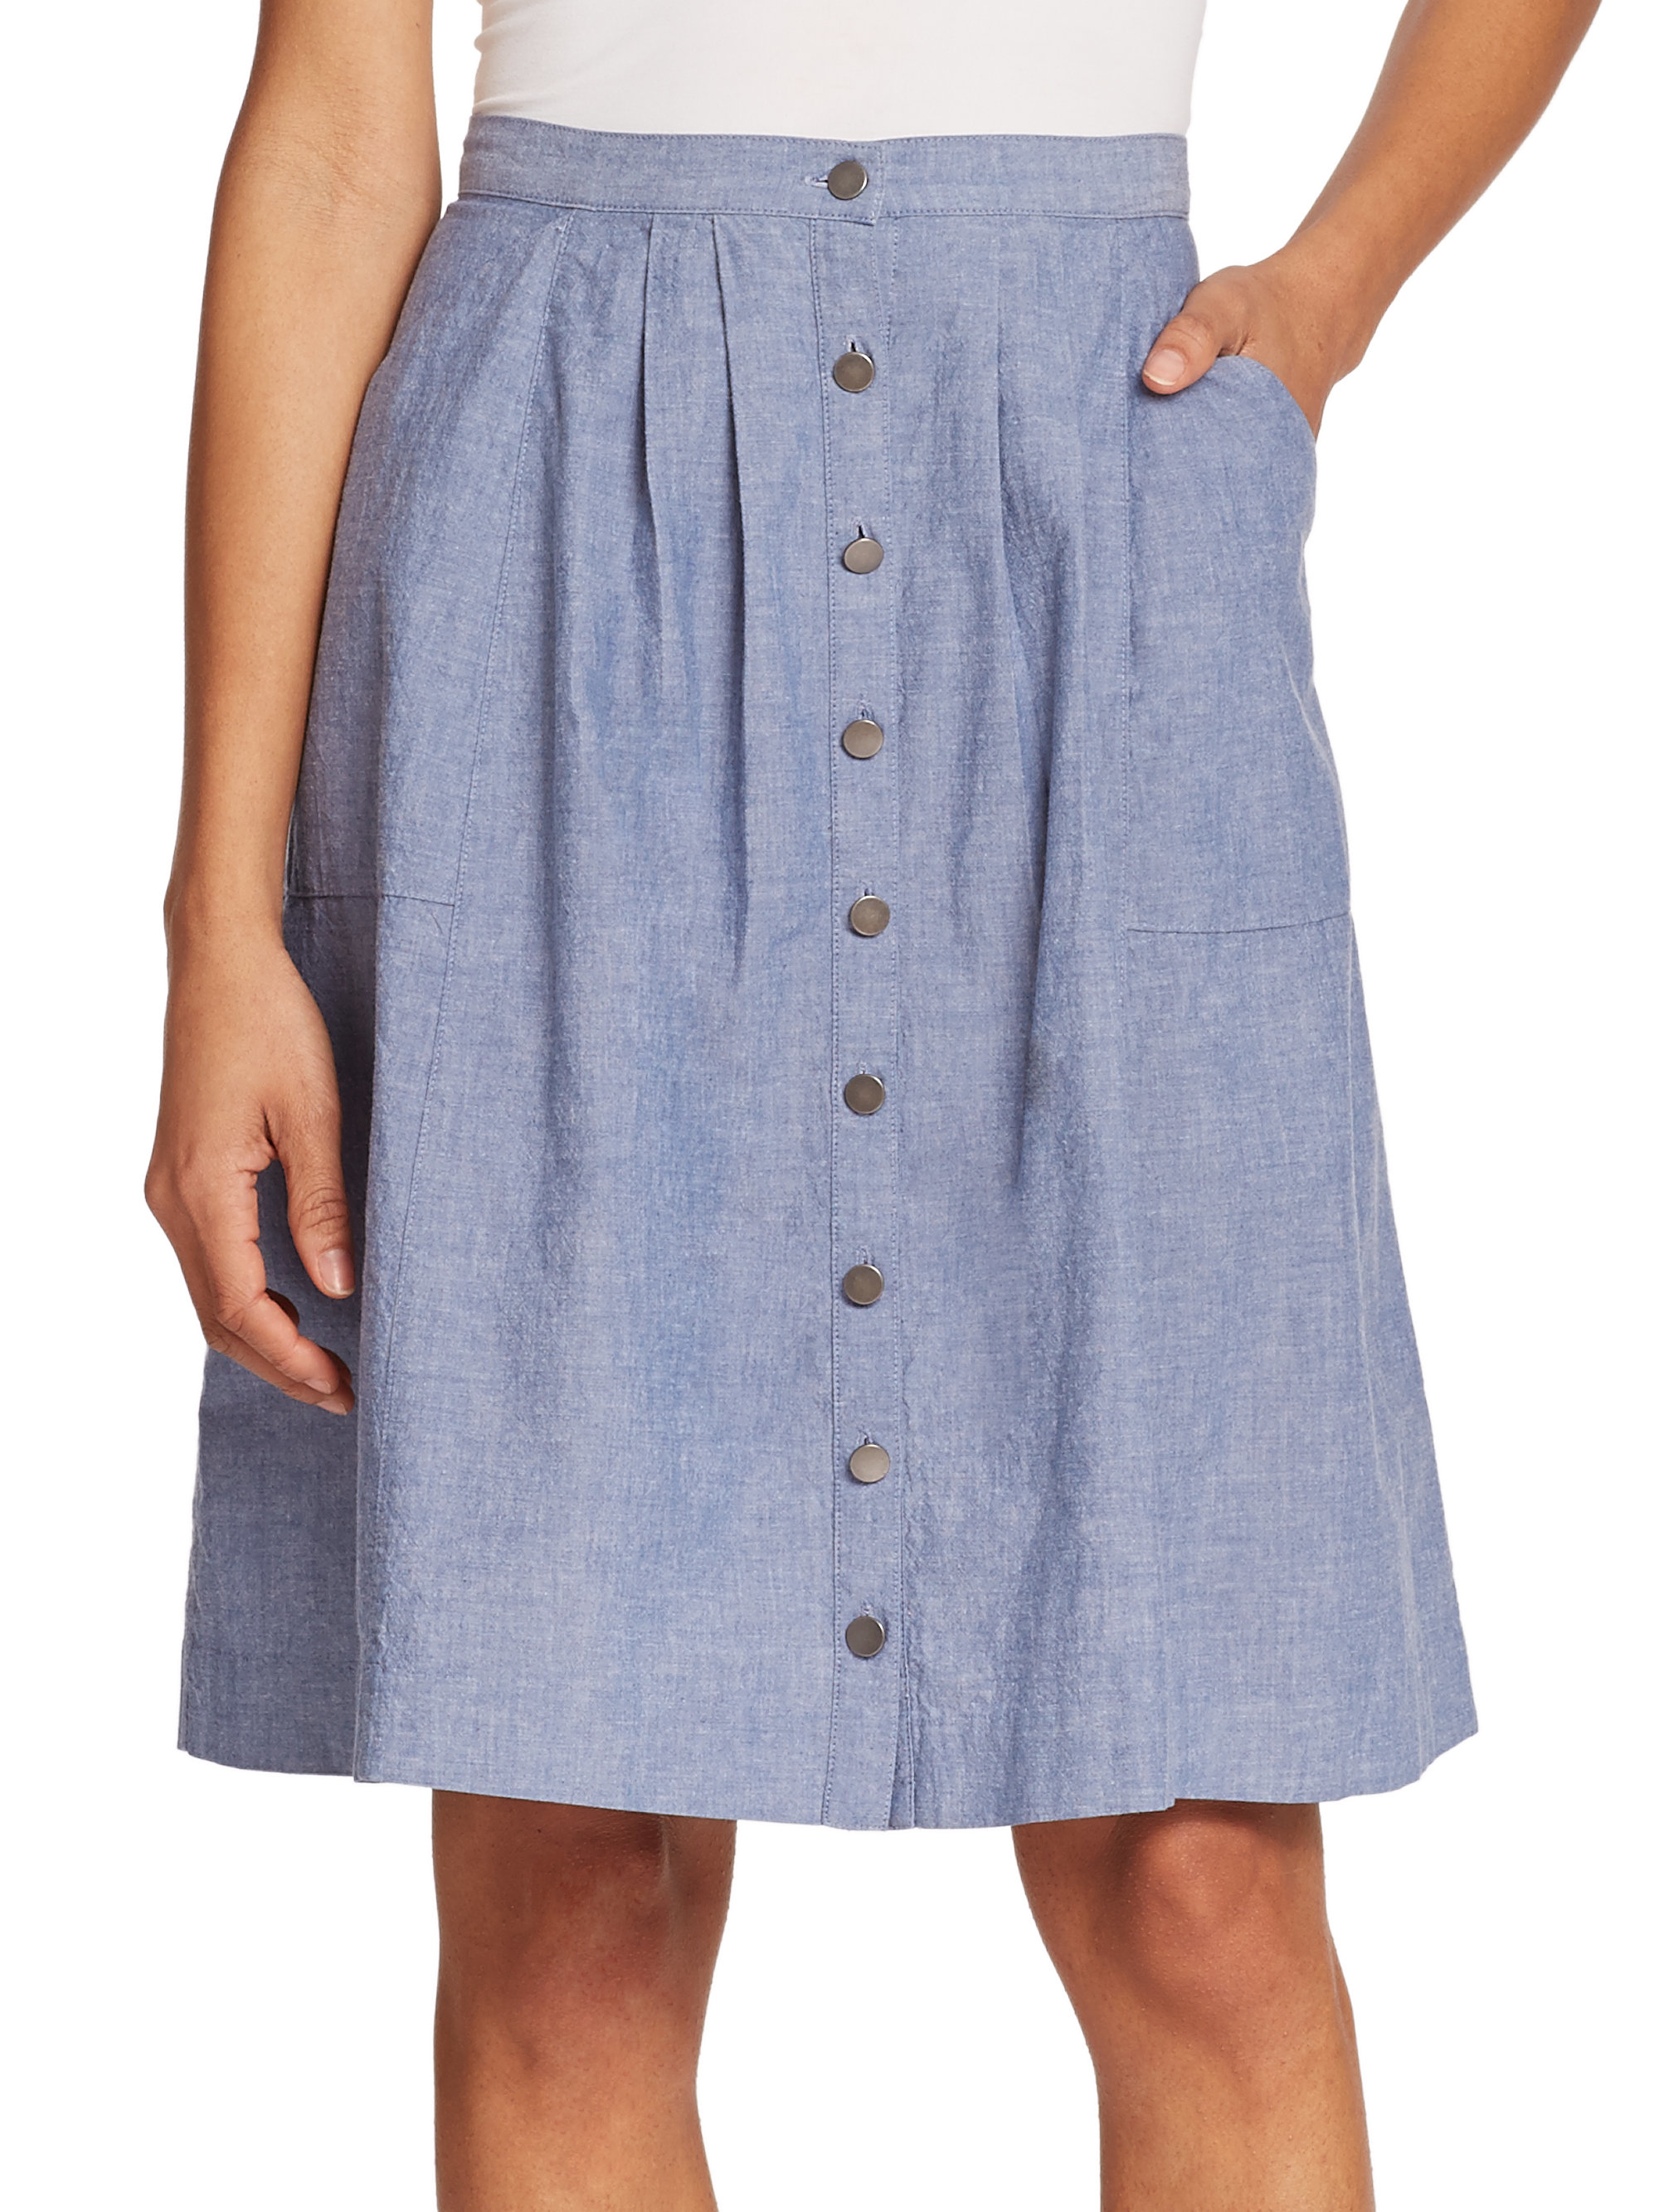 Lyst - Joie Brinker Button-front Chambray Skirt in Gray